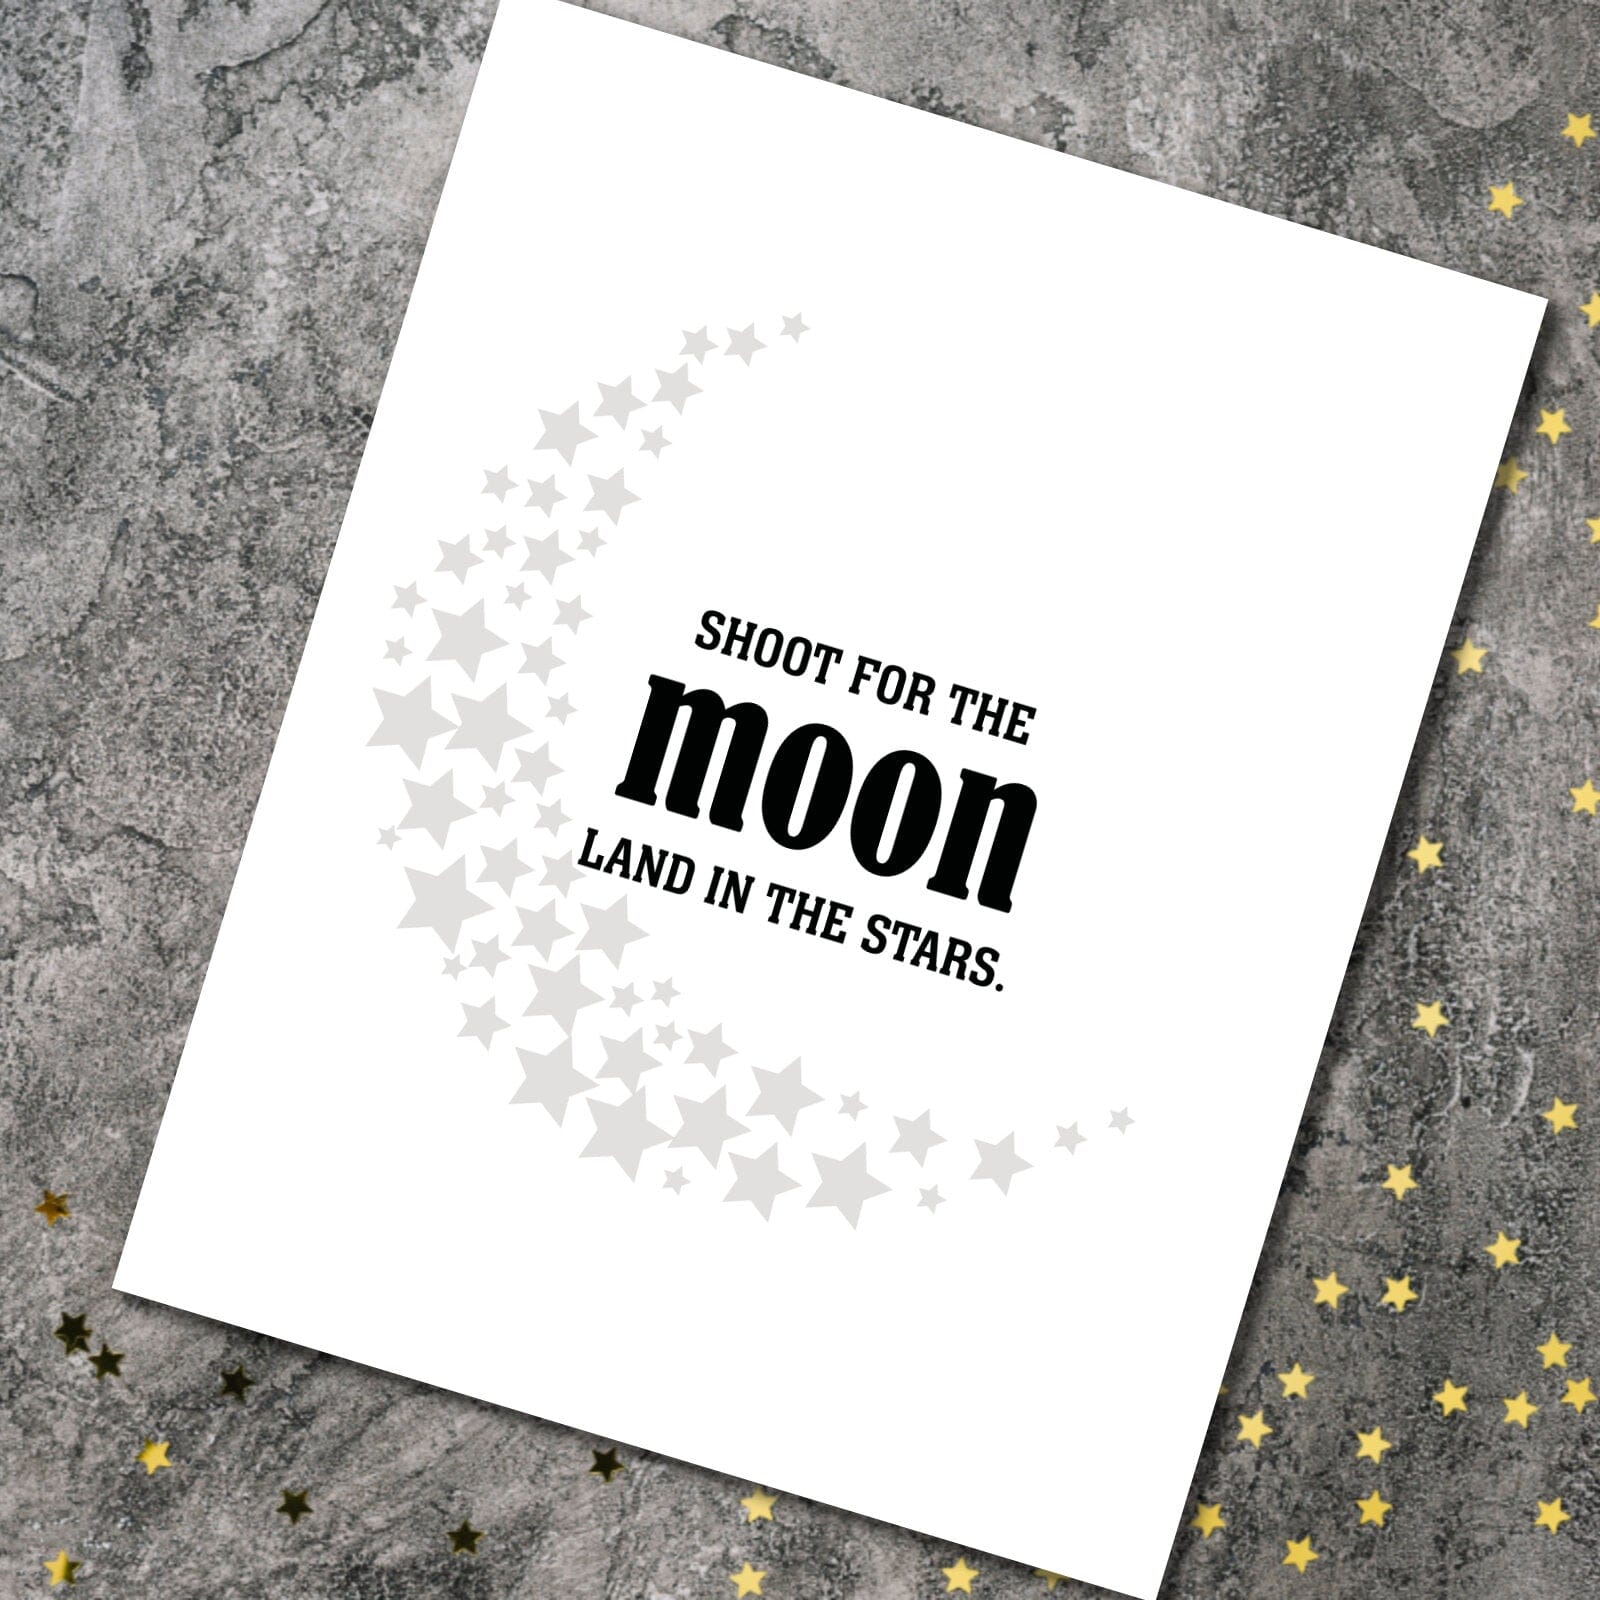 Shoot for the Moon, Land in the Stars - Wise and Witty Print Wise and Wiseass Quotes Song Lyrics Art 8x10 Print 